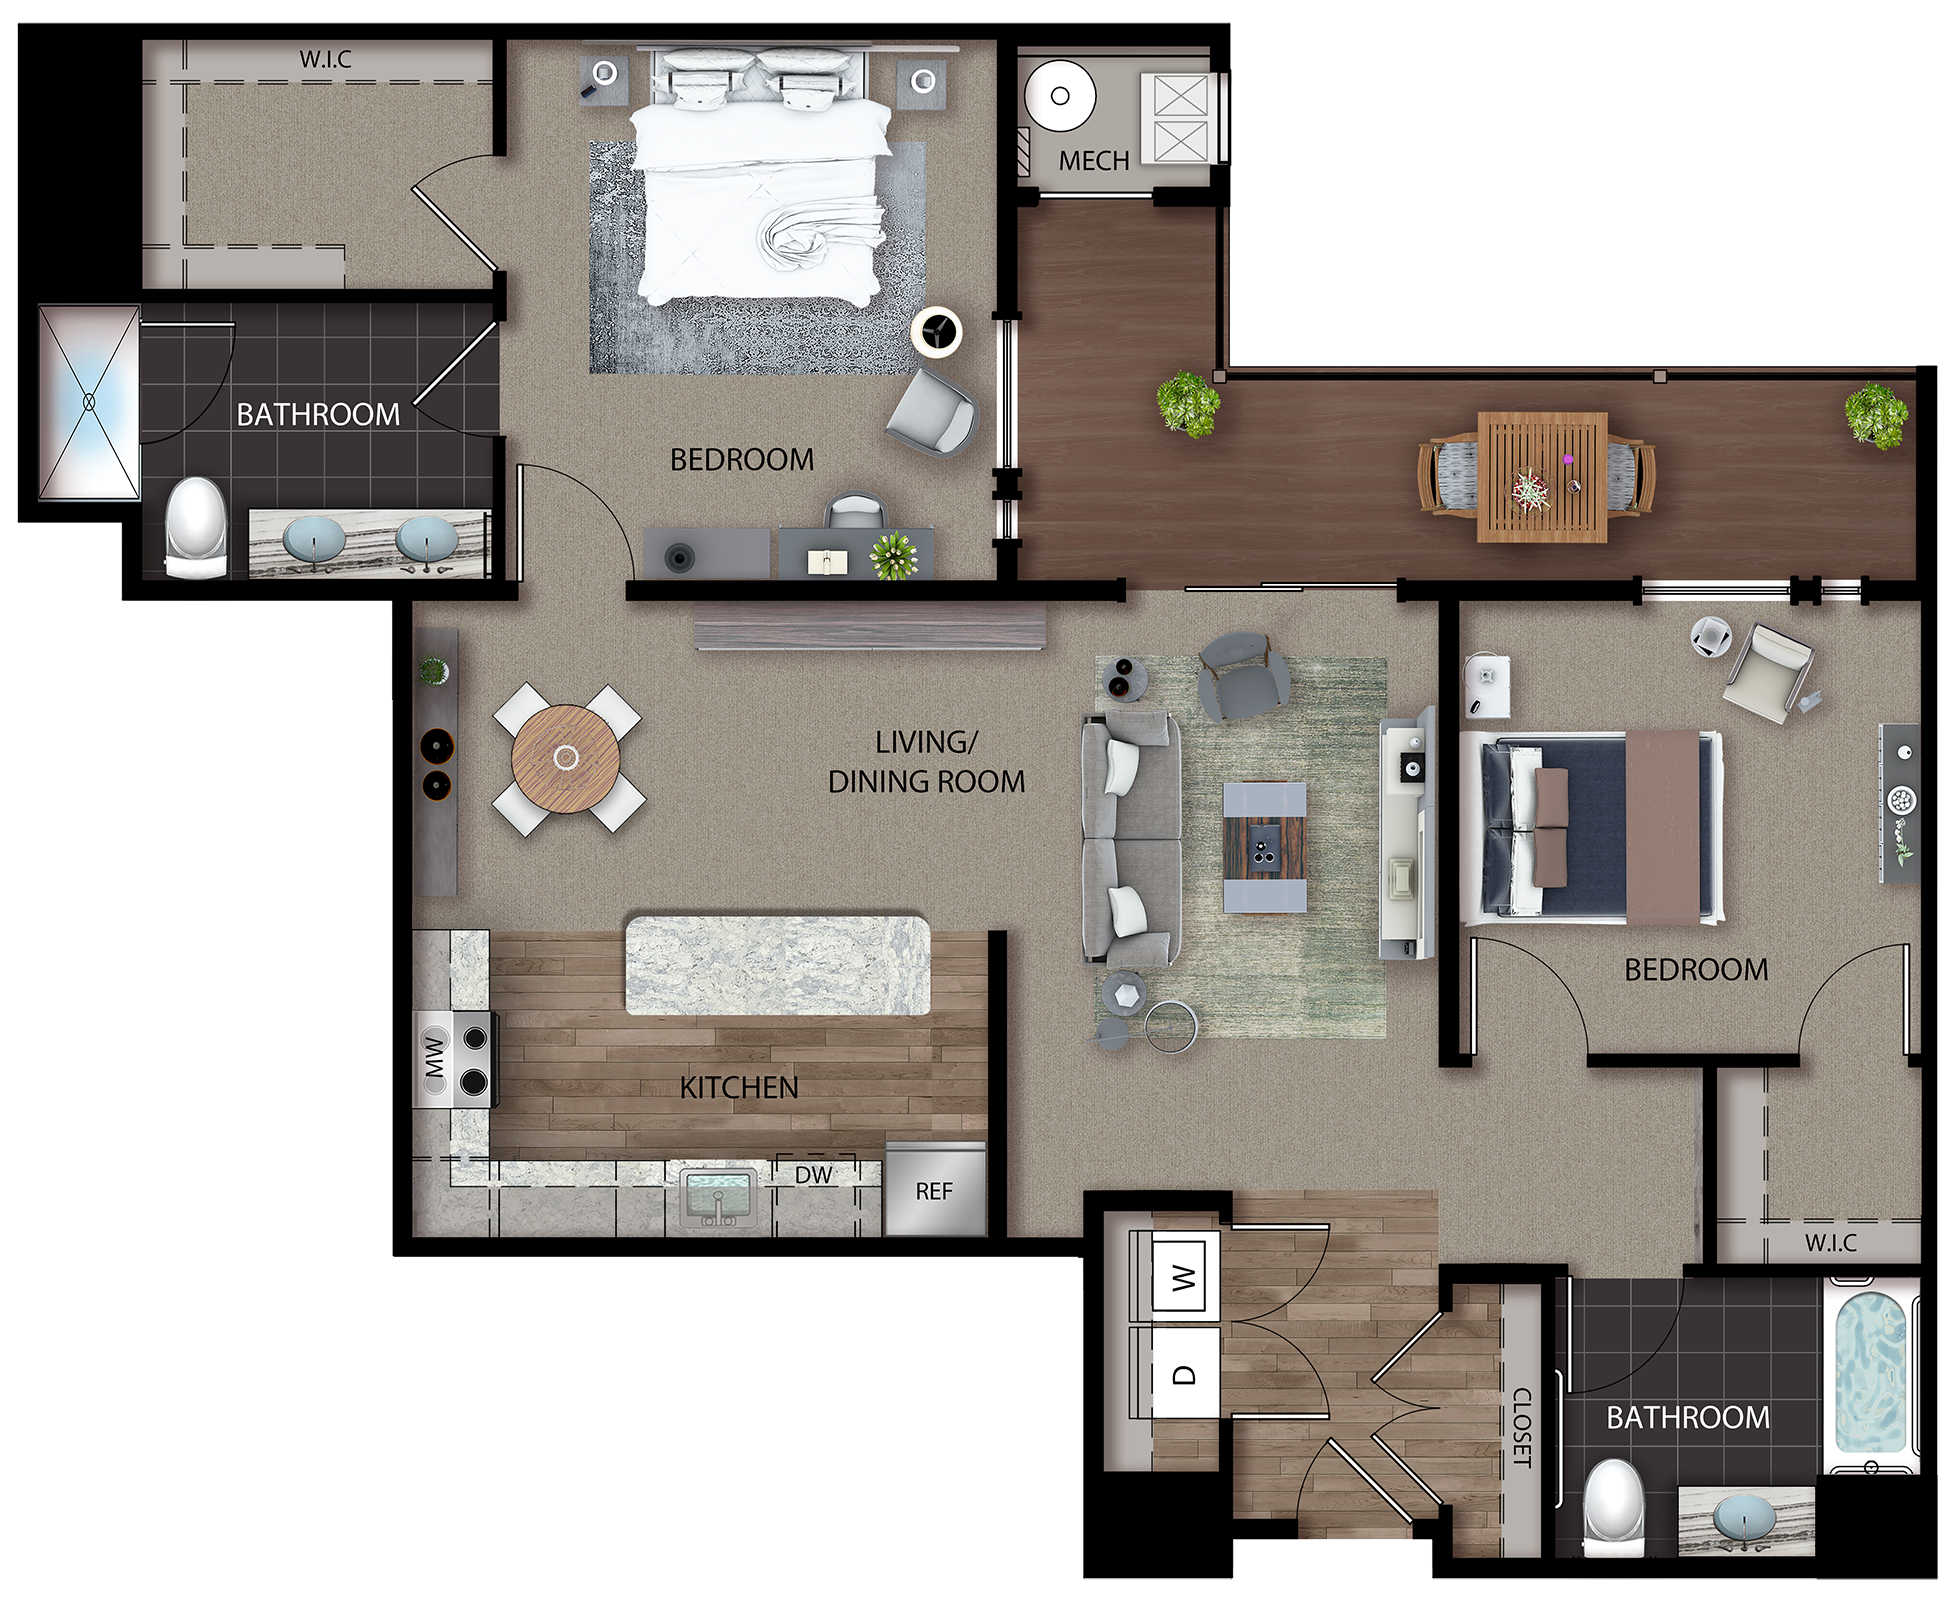 Detailed floor plan showing a two bedroom apartment with L shaped deck